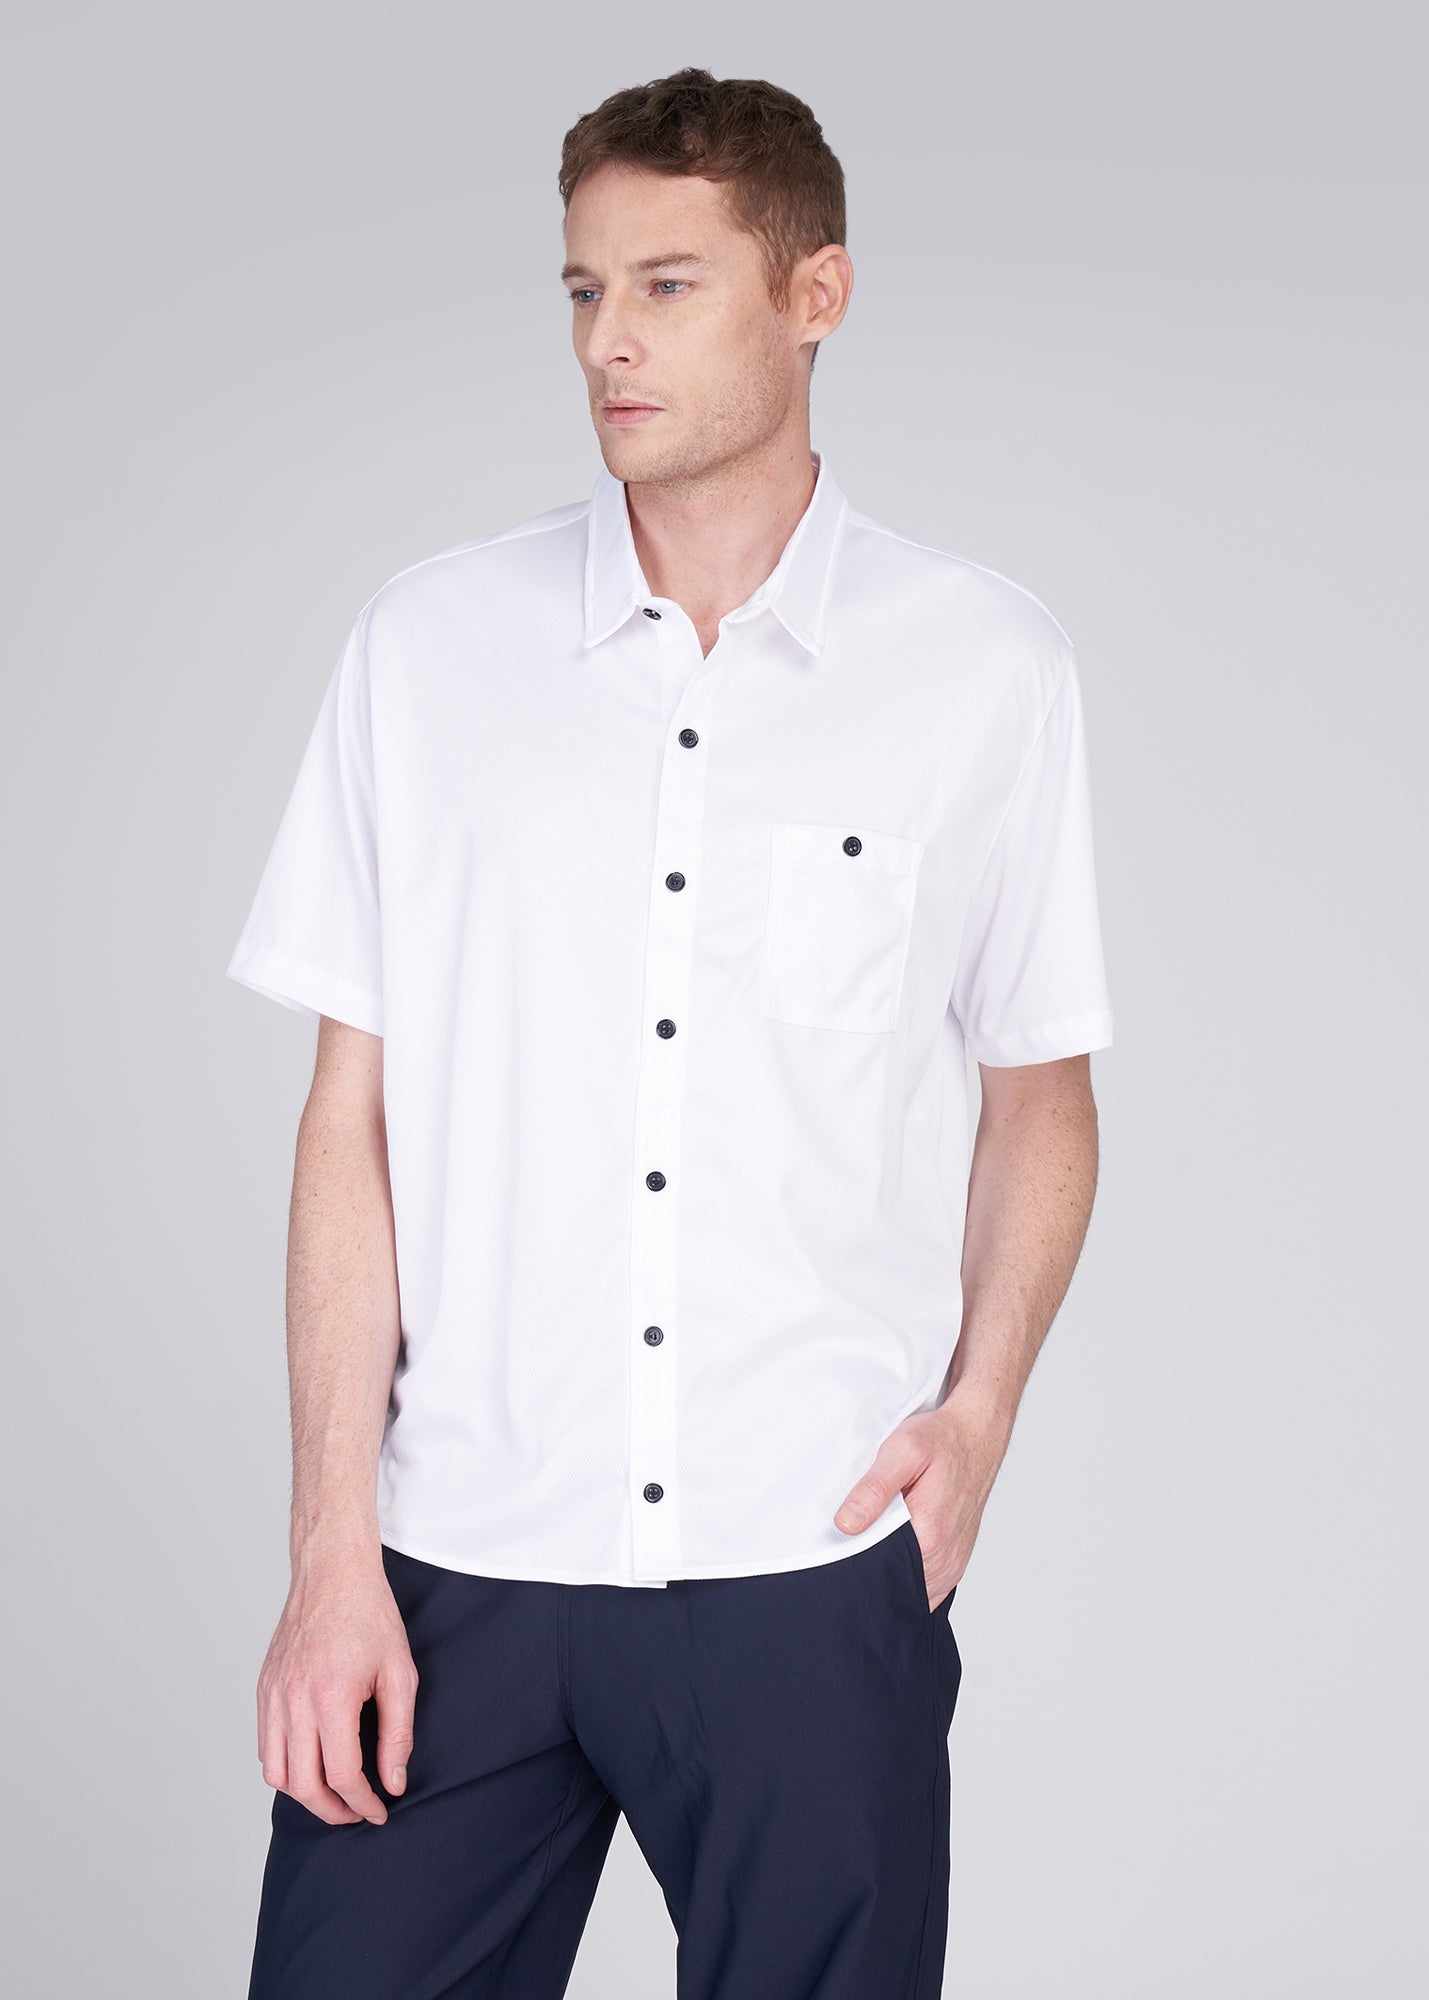 Courier PH Men's Button Down Sports Jersey